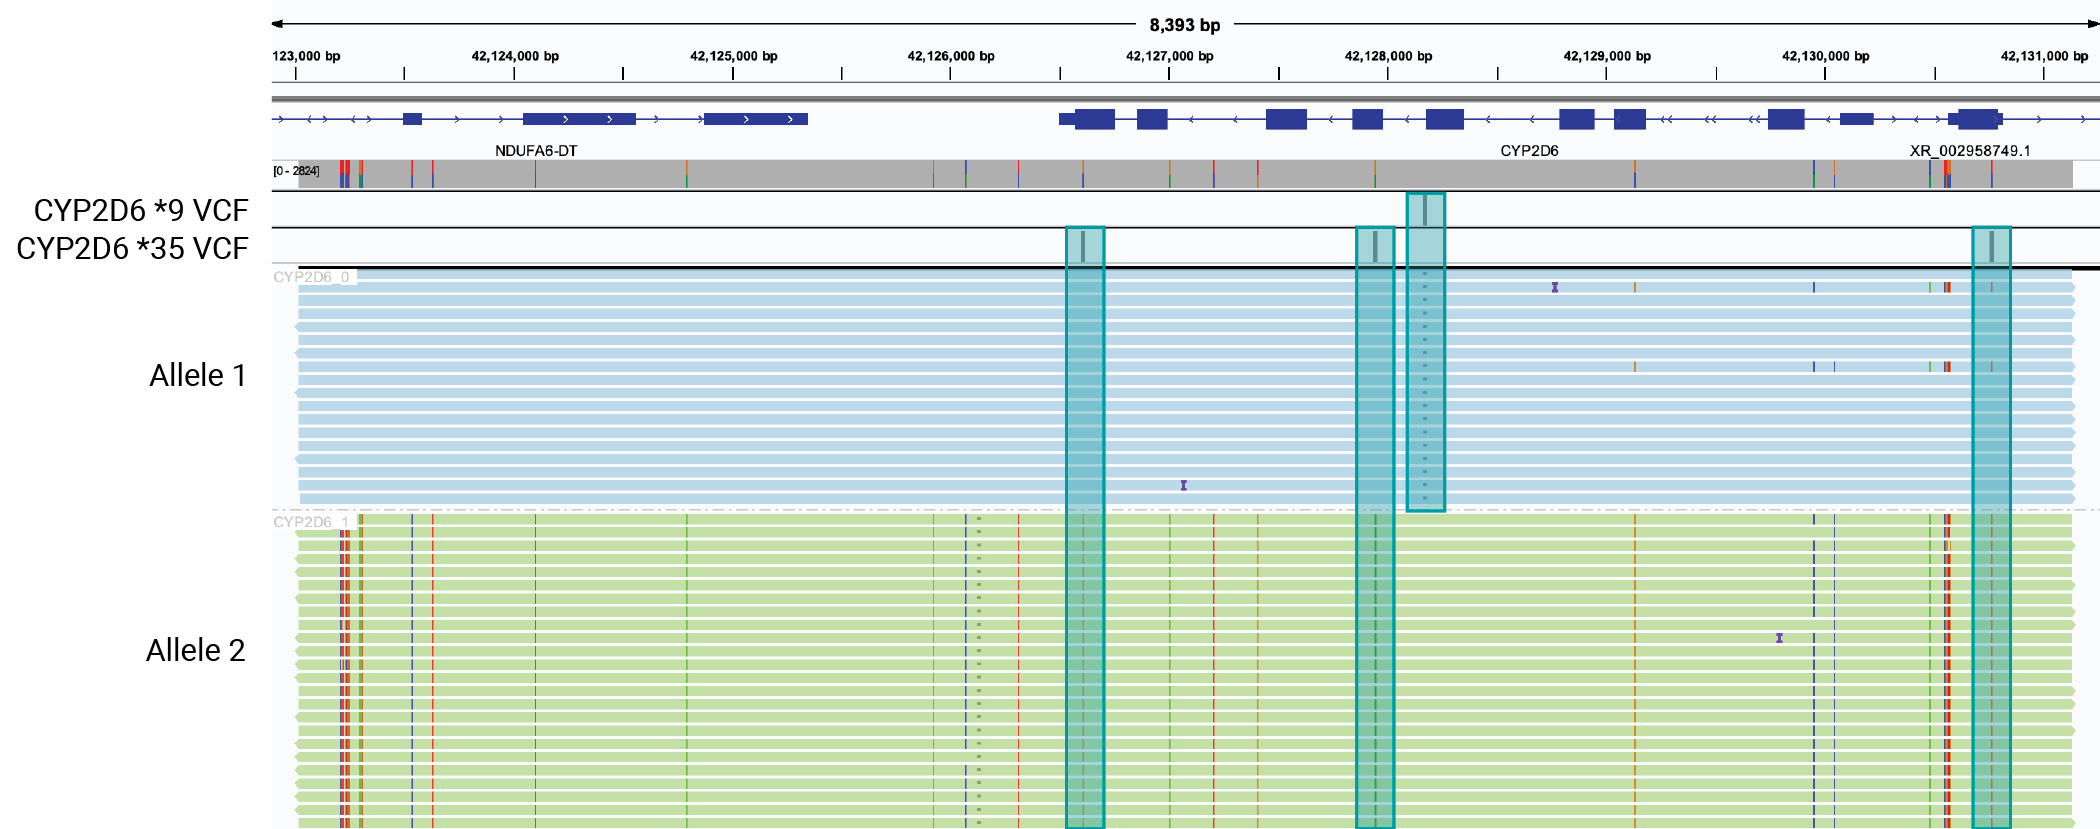 Full length amplicon sequencing of CYP2D6